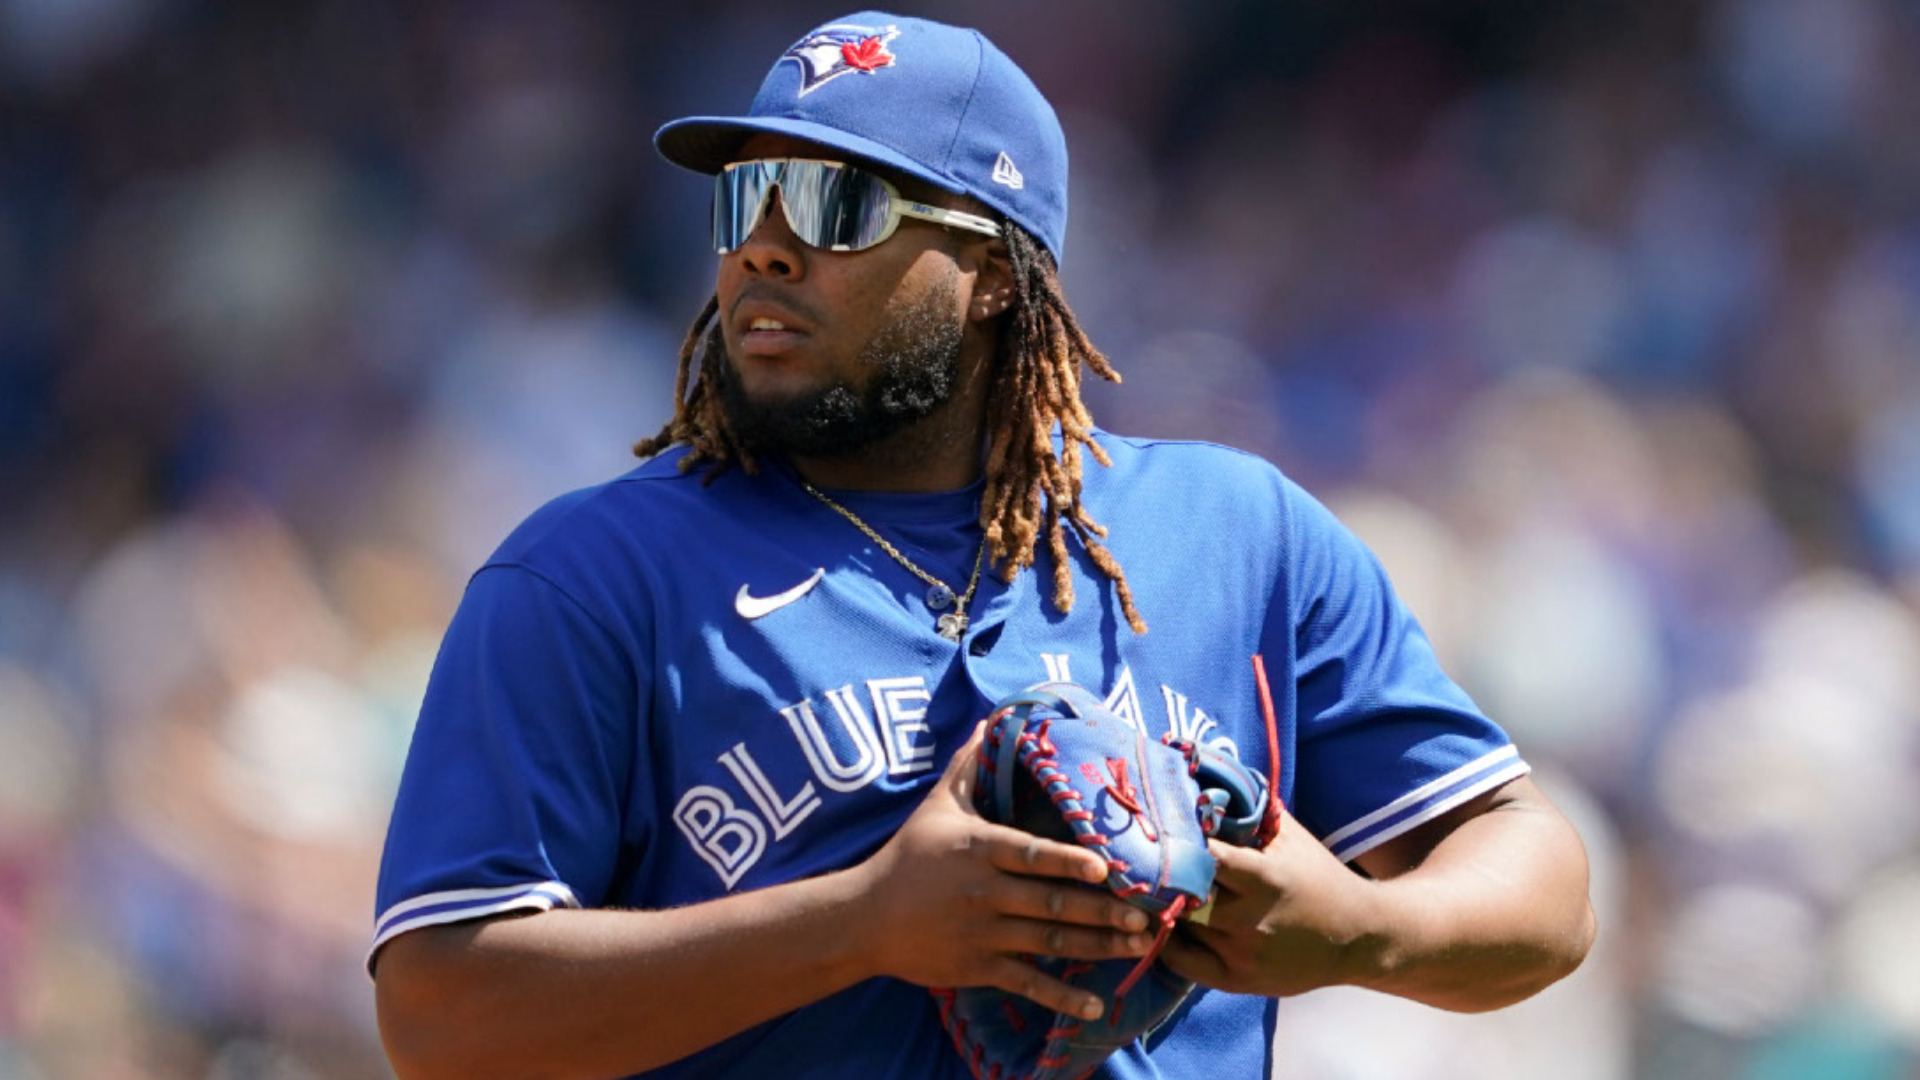 What does the future hold for Blue Jays star Vladimir Guerrero Jr.?